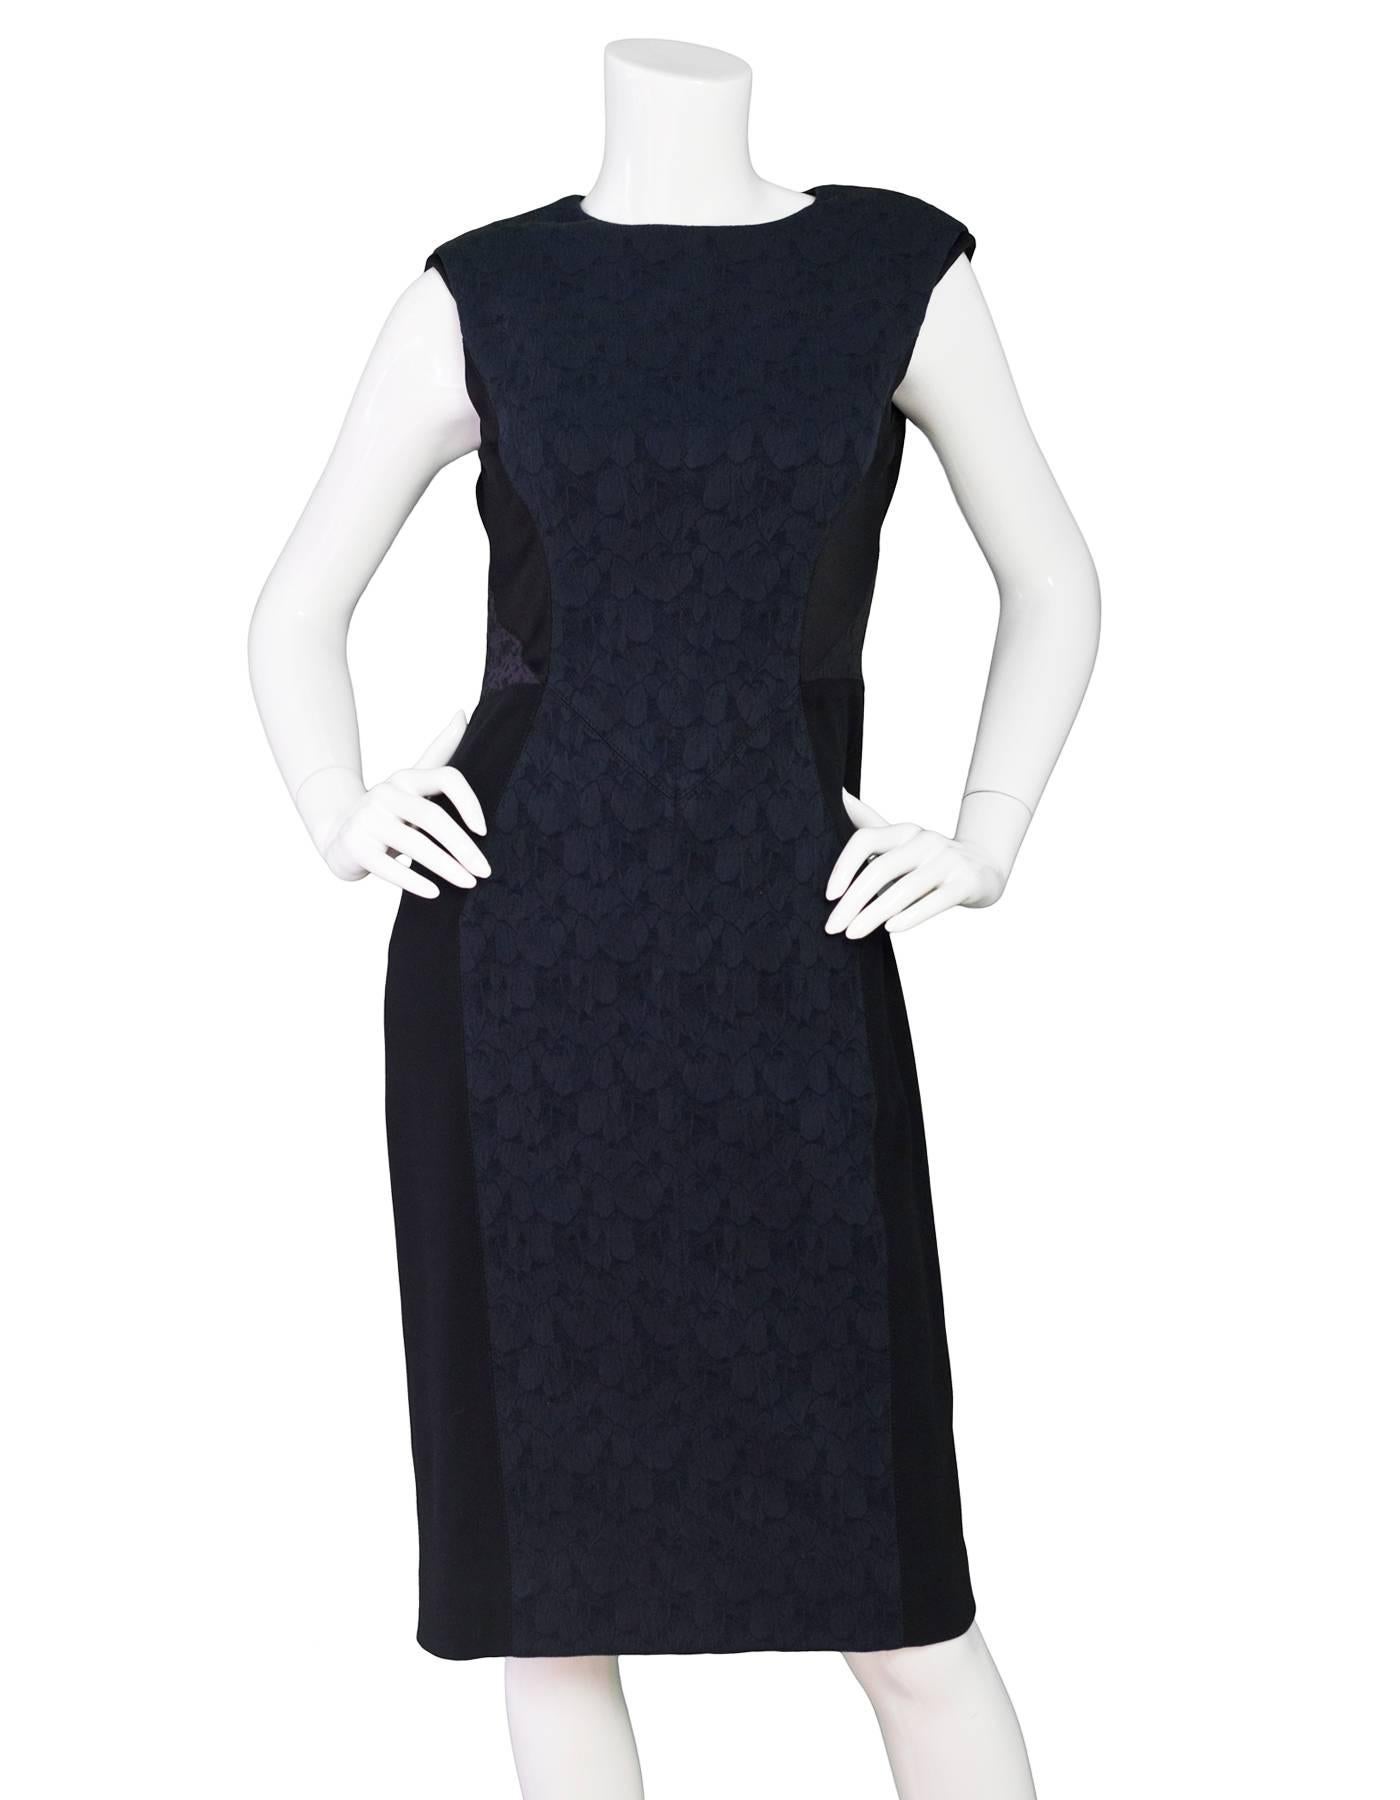 J. Mendel Black & Navy Print Dress Sz 6

Made In: USA
Color: Black, navy
Composition: 49% cotton, 25% polyamide, 24% viscose, 2% elastine
Lining: Black textile
Closure/Opening: Zip up back
Exterior Pockets: None
Overall Condition: Excellent